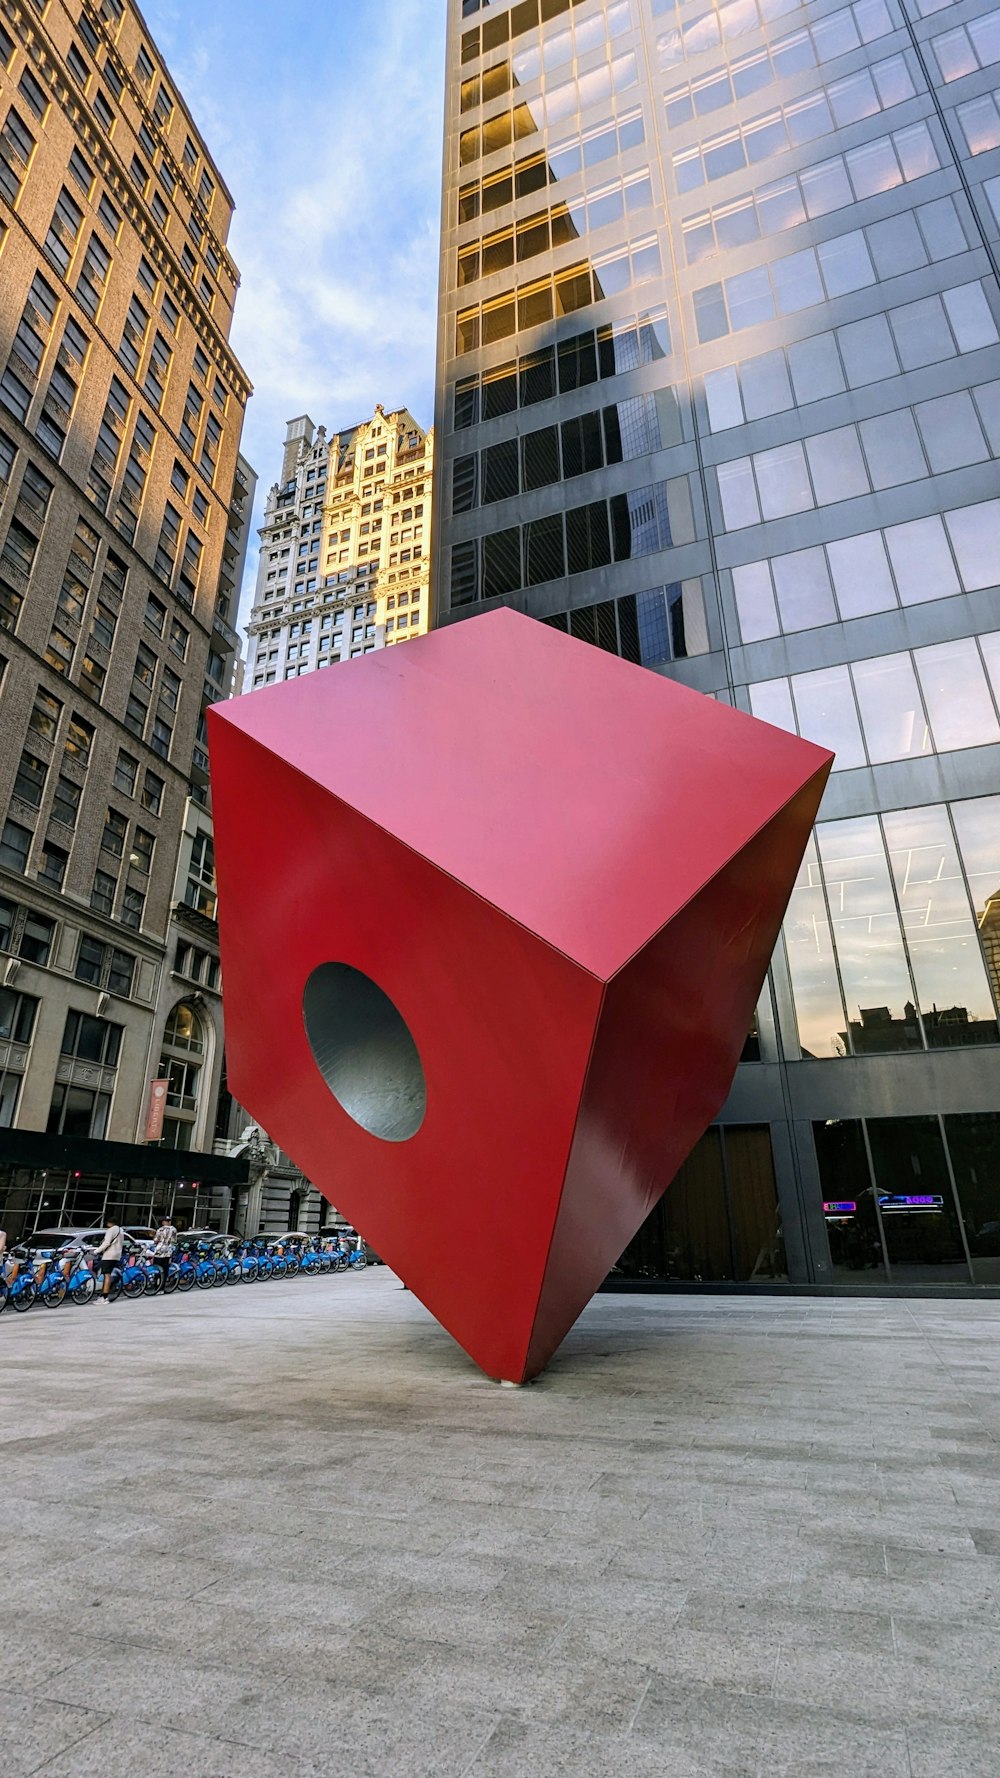 a large red object sitting in front of tall buildings